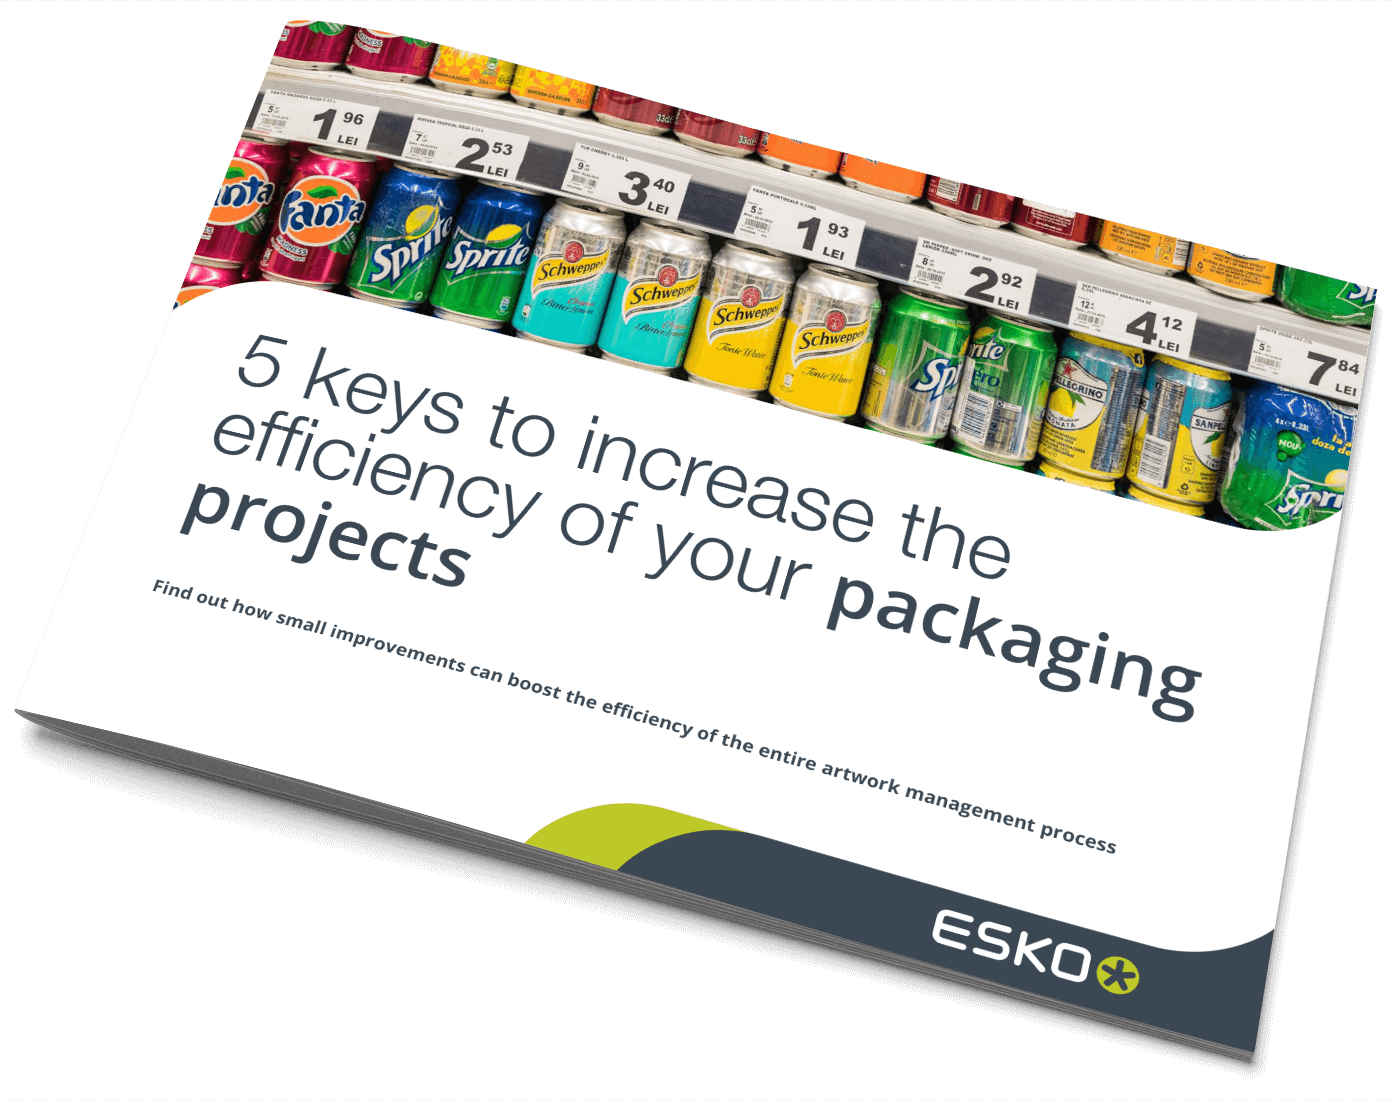 5 keys to increase the efficiency of your packaging projects